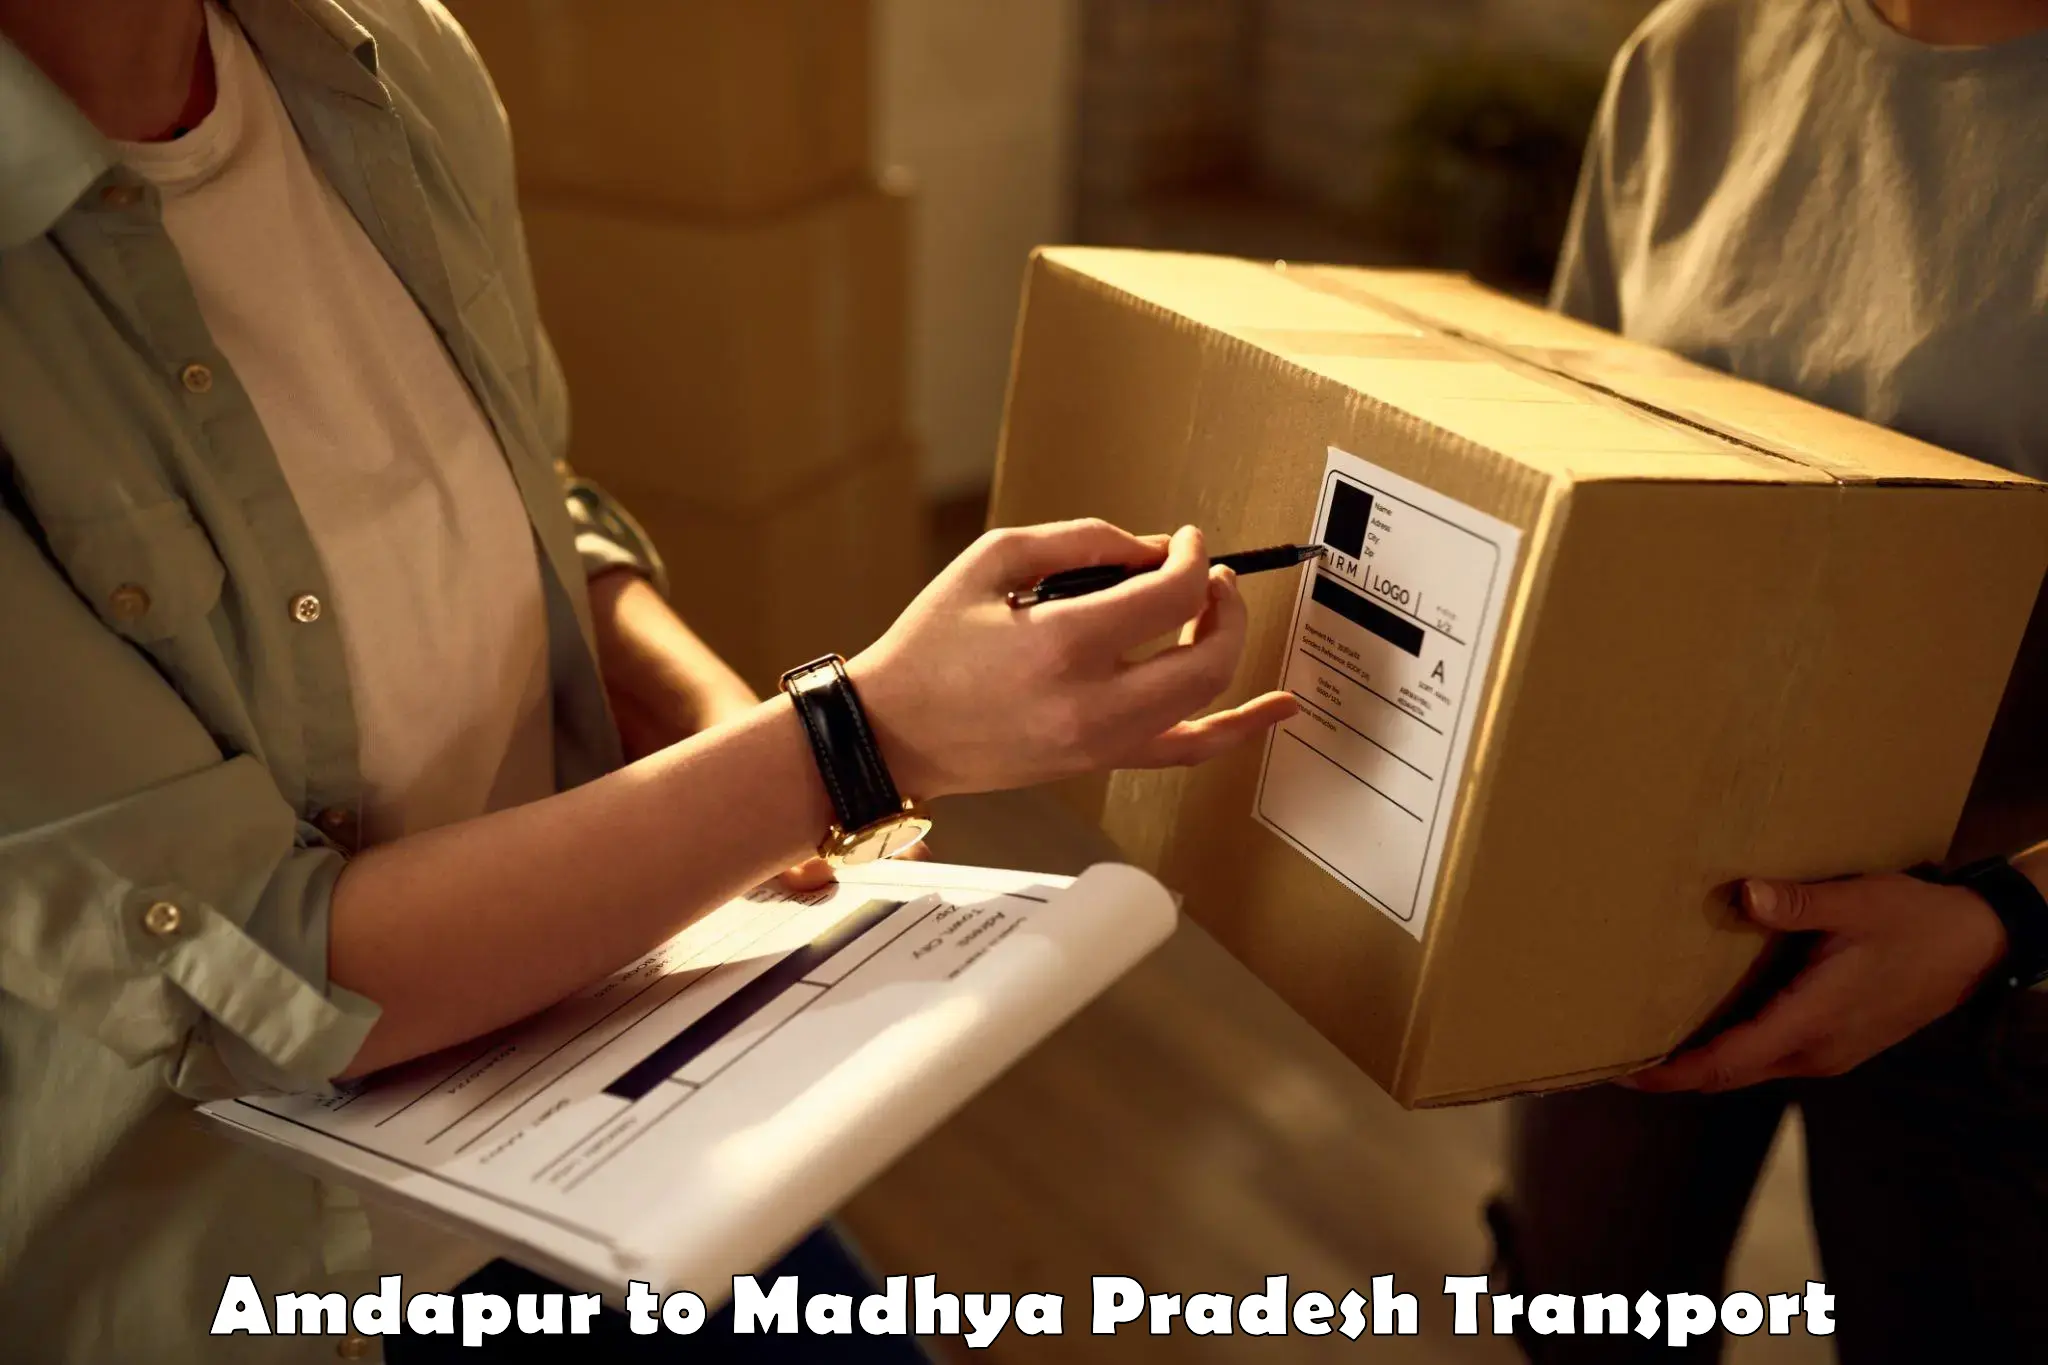 Delivery service Amdapur to Ratangarh MP